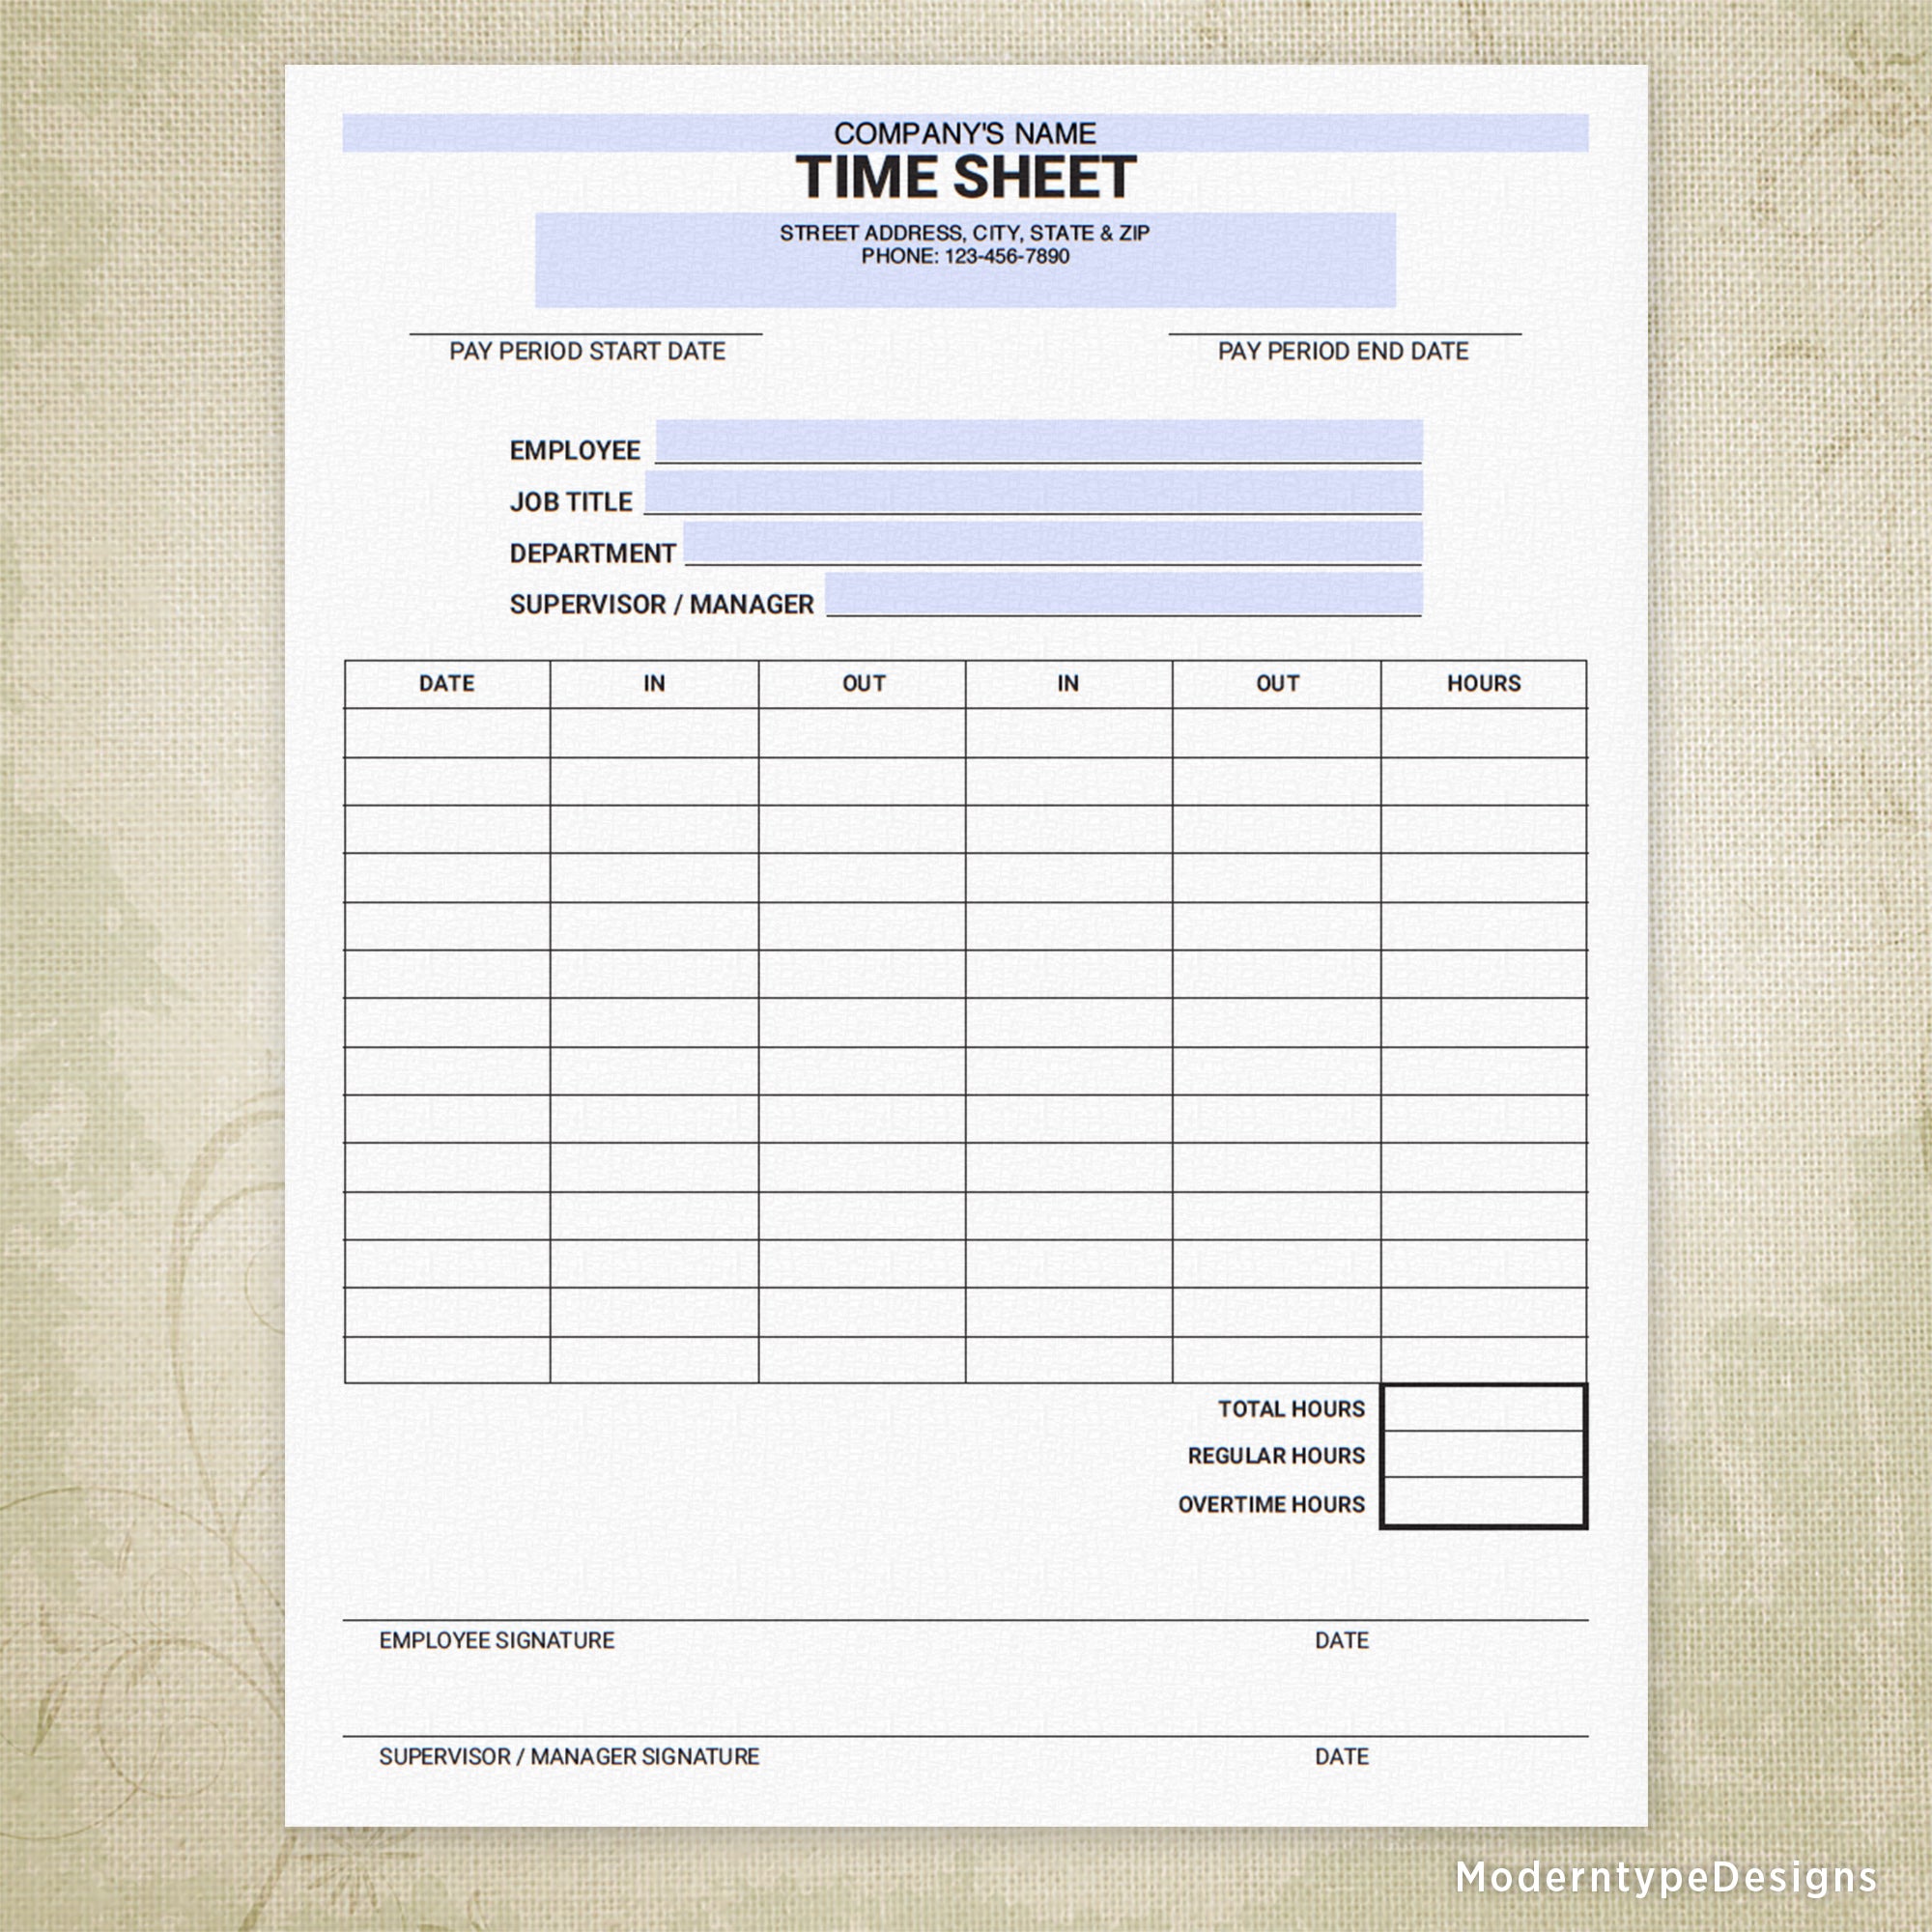 Employee Time Sheet Printable Form, Personalized